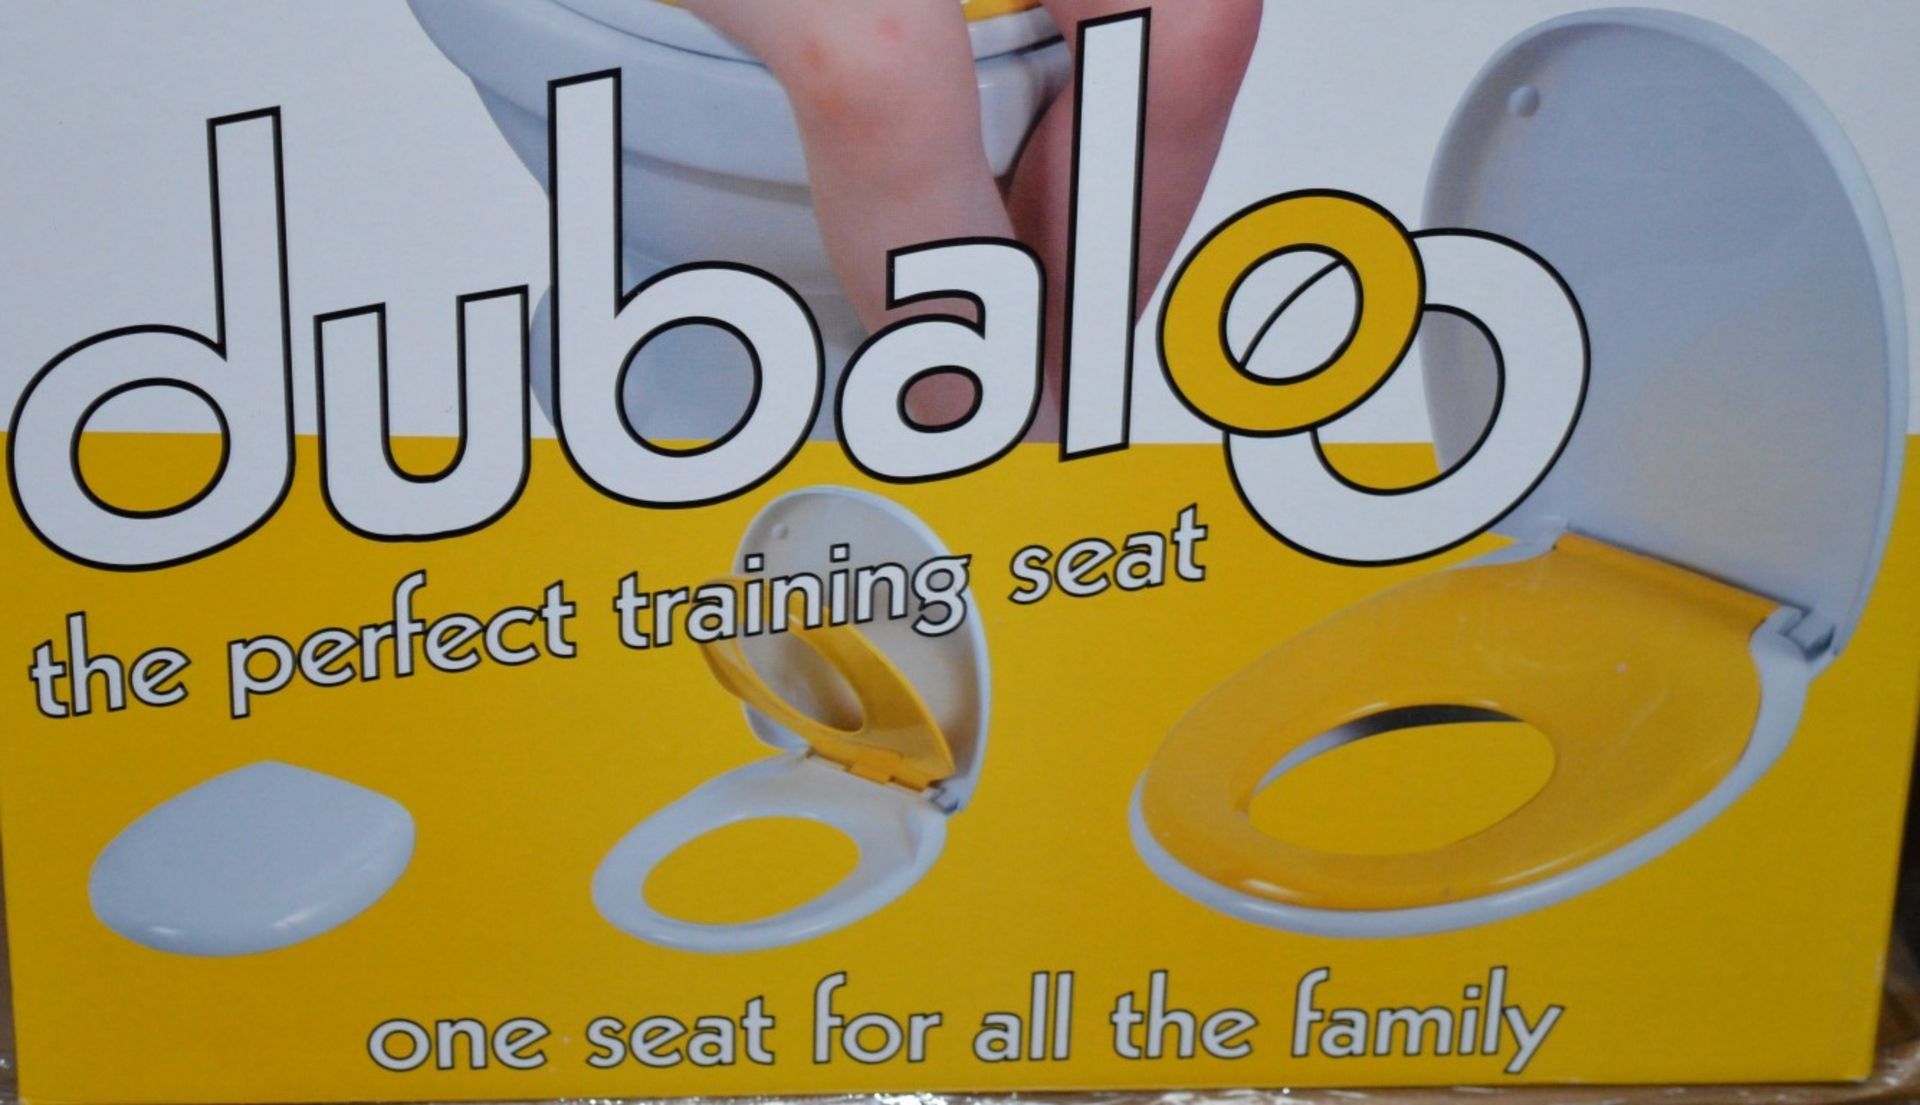 5 x Dubaloo 2 in 1 Family Training Toilet Seats - One Seat For All The Family - Full Size Toilet - Image 4 of 6